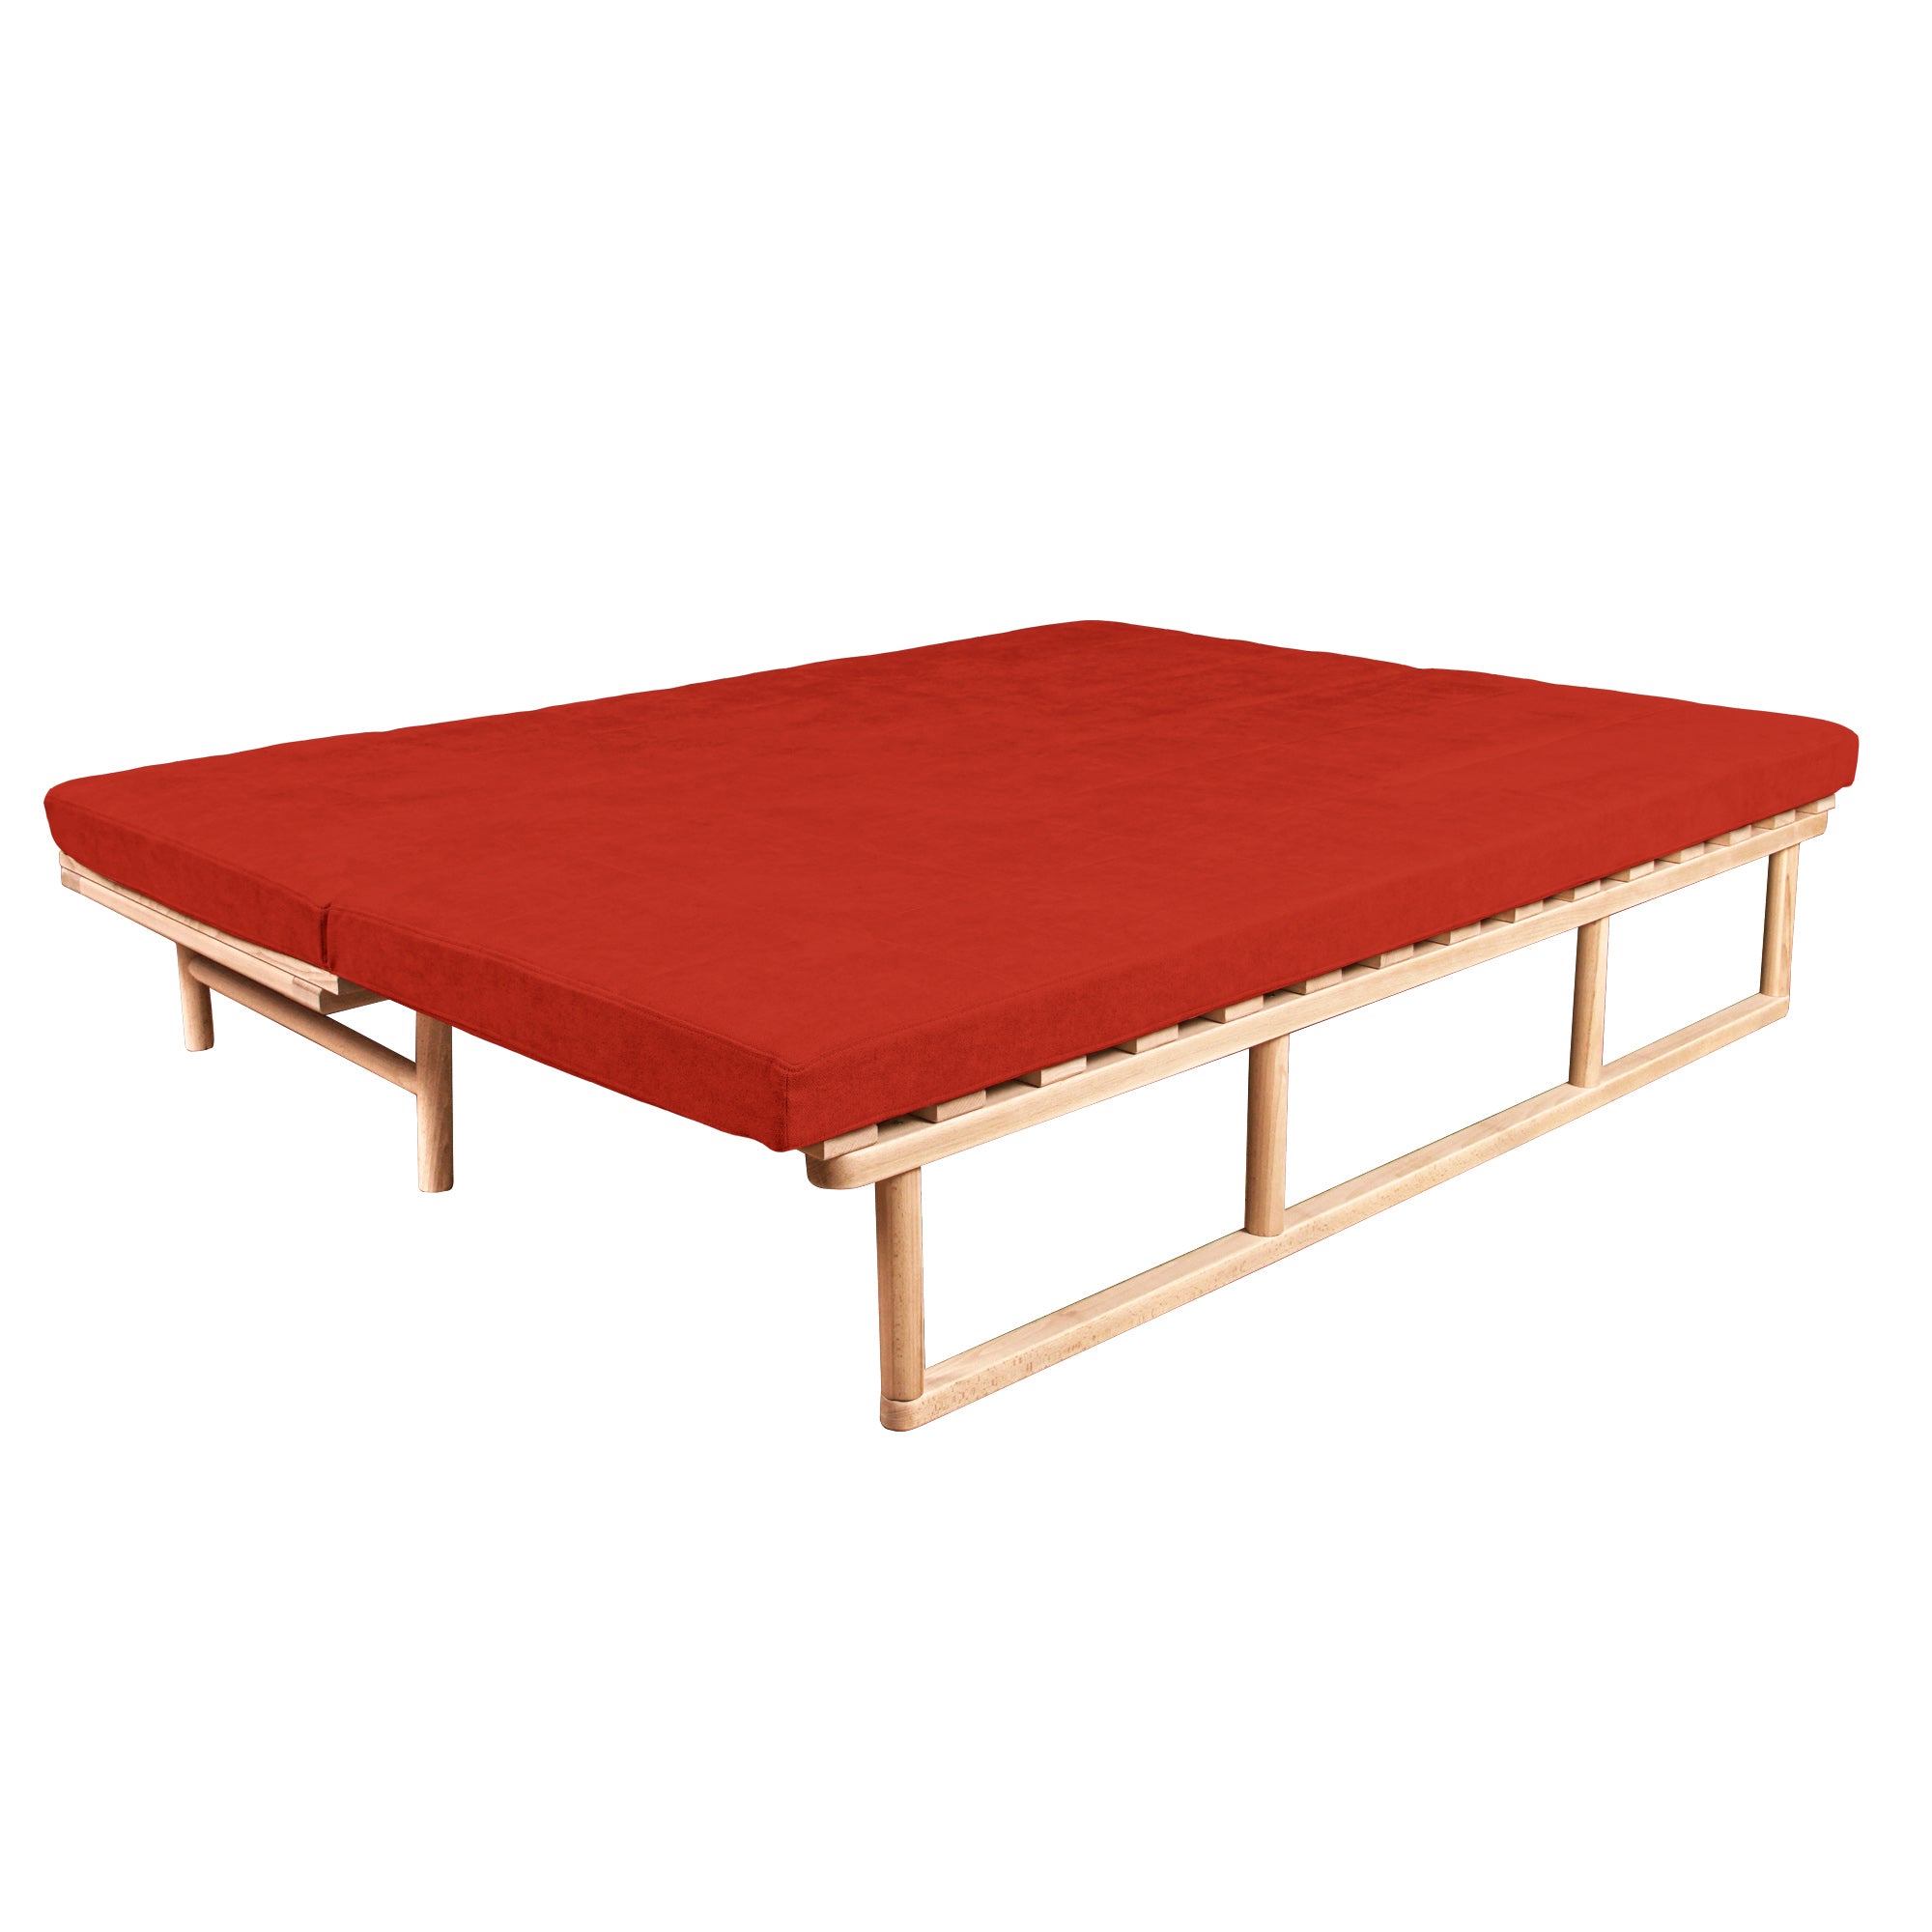 Le MAR Folding Daybed, Beech Wood Frame, Natural Colour-upholstery red-folded view